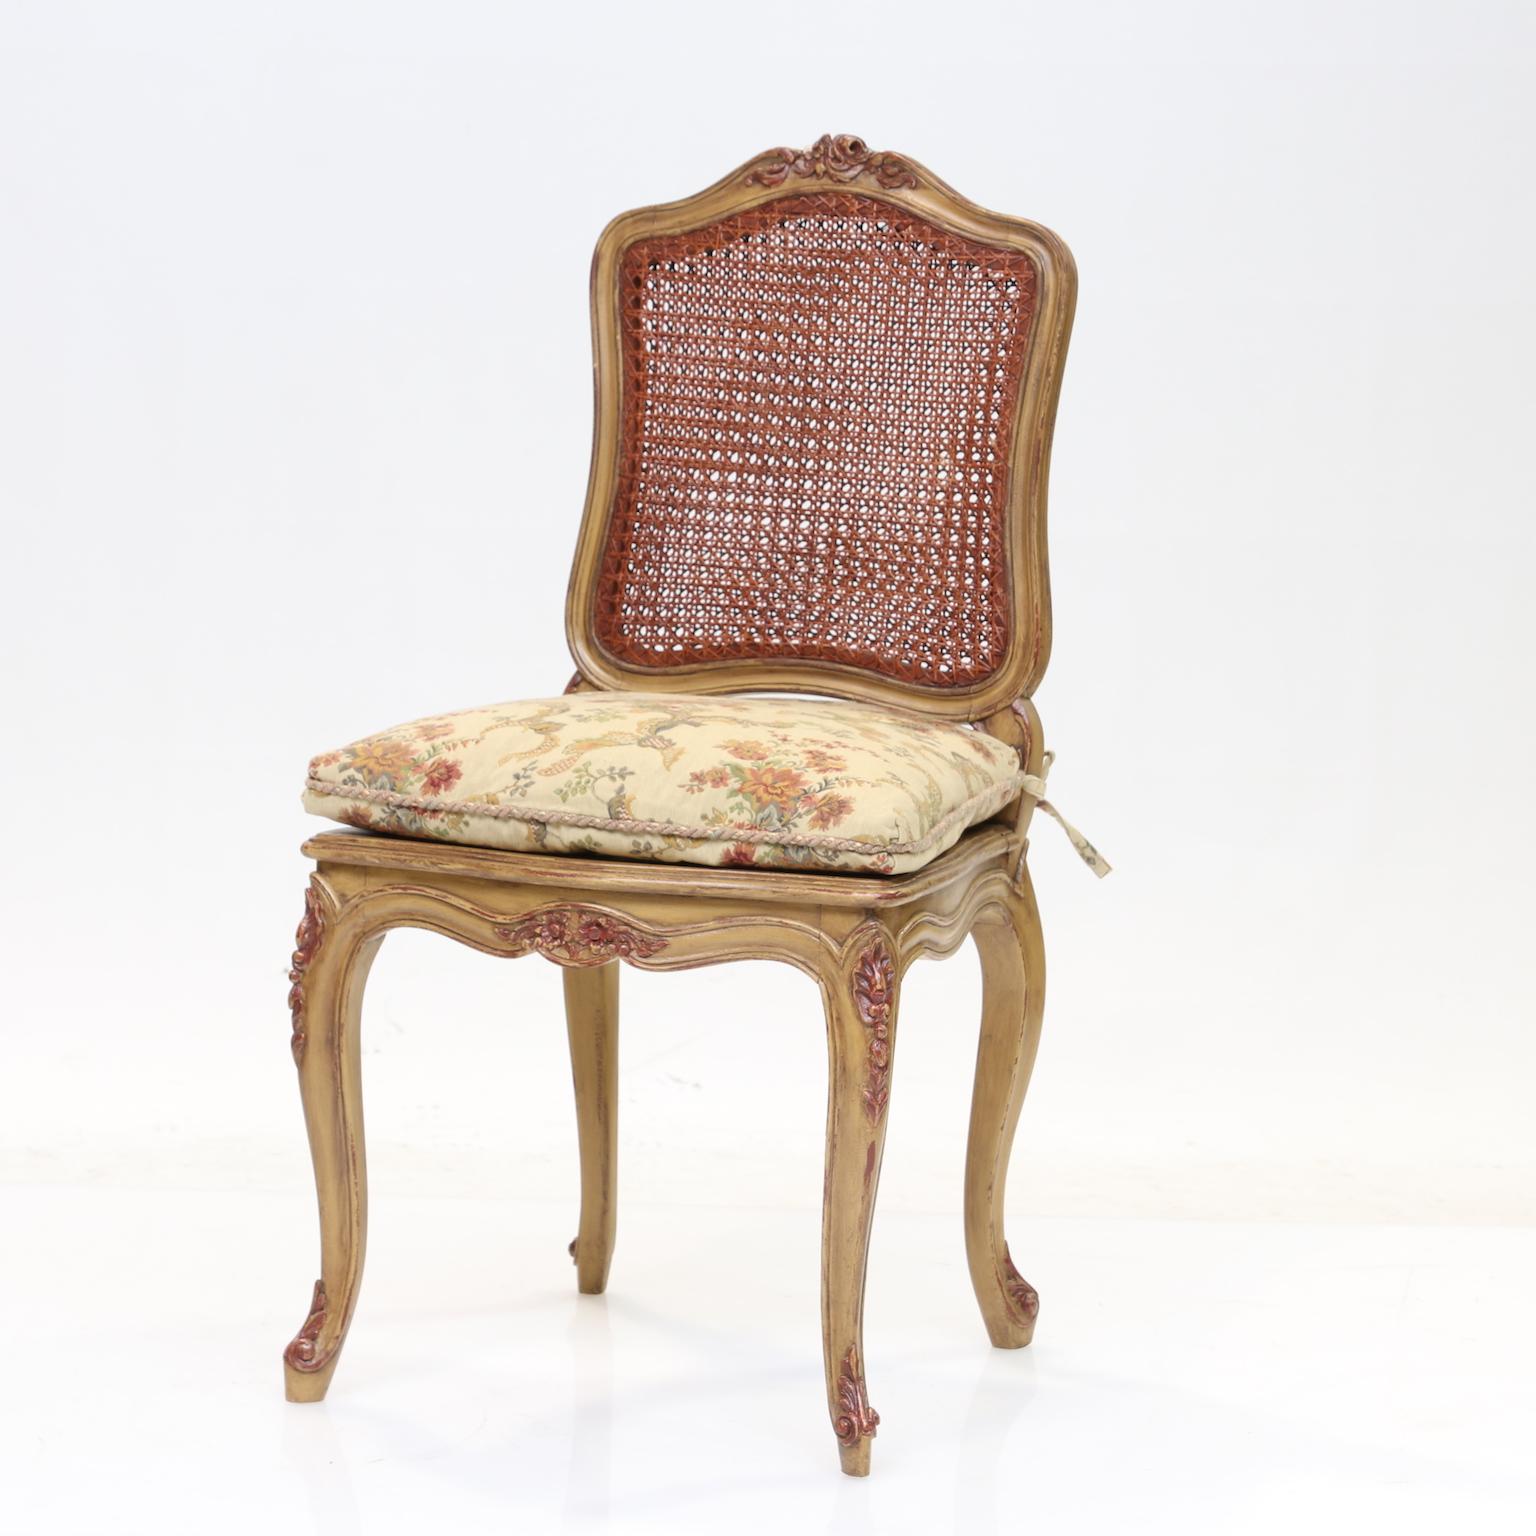 Louis XV style dining chairs set of 10
Set of 10 painted Louis XV style dining chairs with cane backs and seats and tie on cushion seats. The cane finished in a slight red tone which blends well with the paint which is highlighted with soft reds on